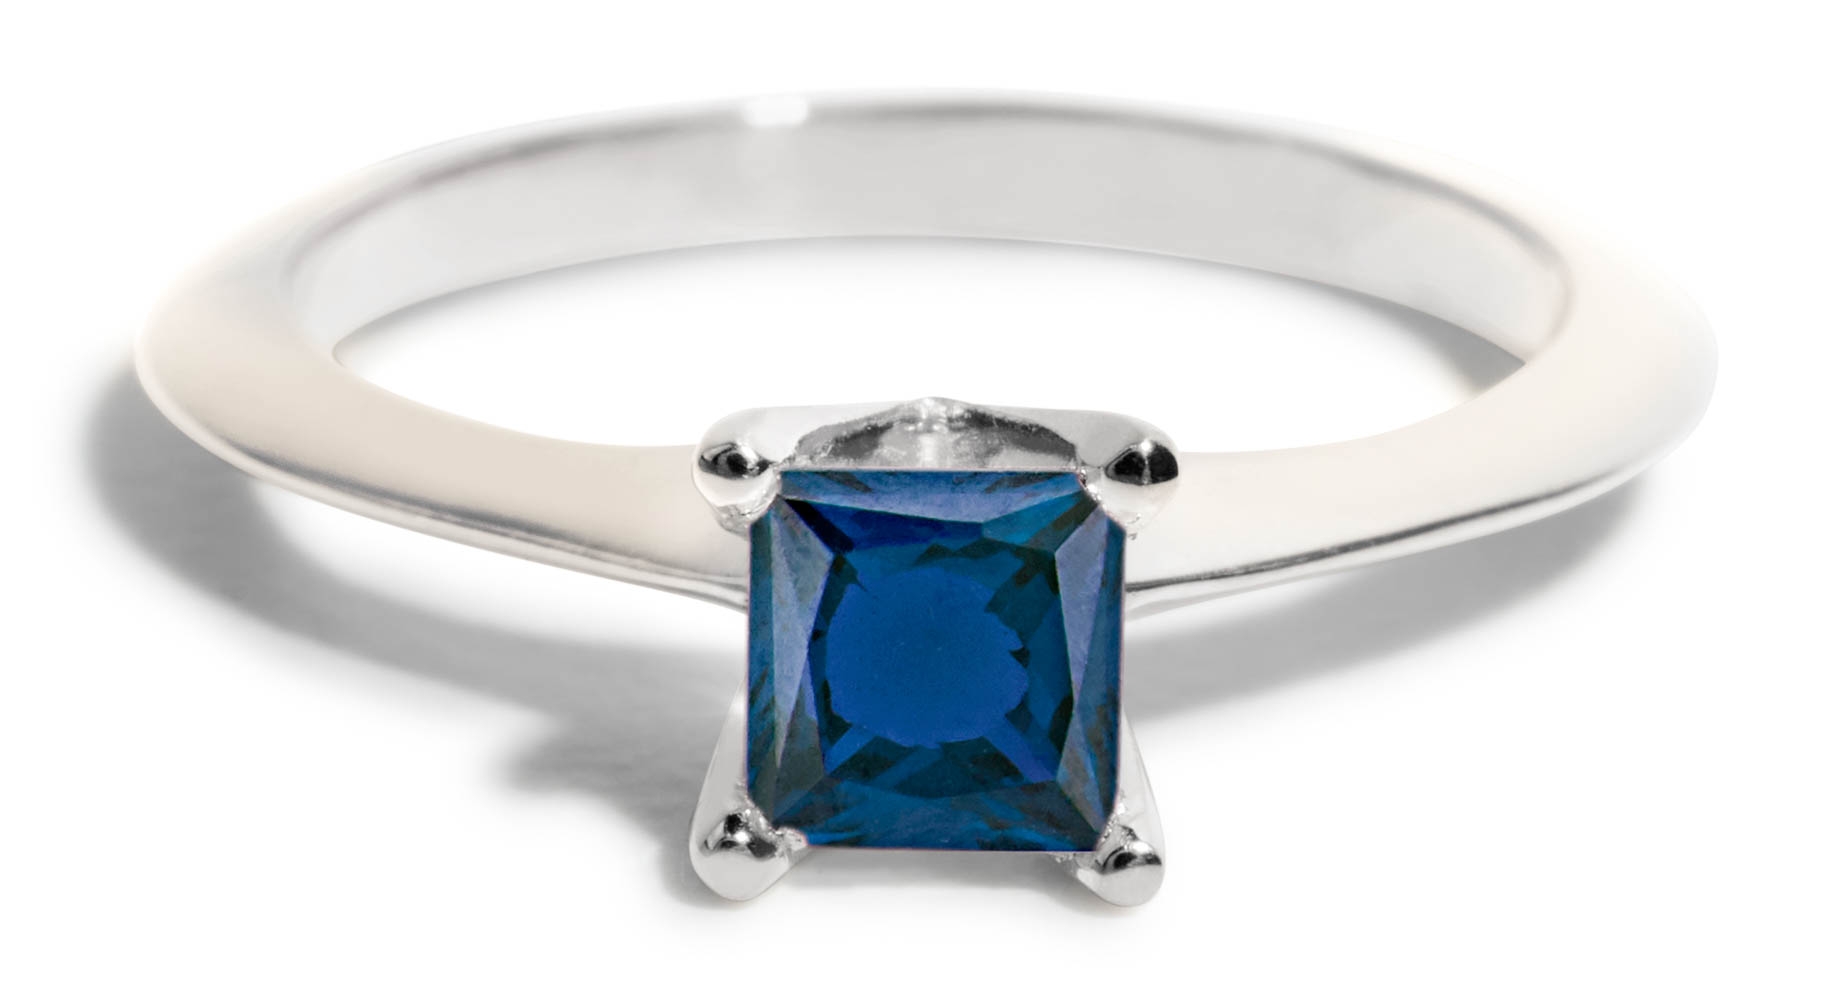 Princess Cut 1.00 cts Blue Sapphire Engagement Ring Sterling Silver | eBay